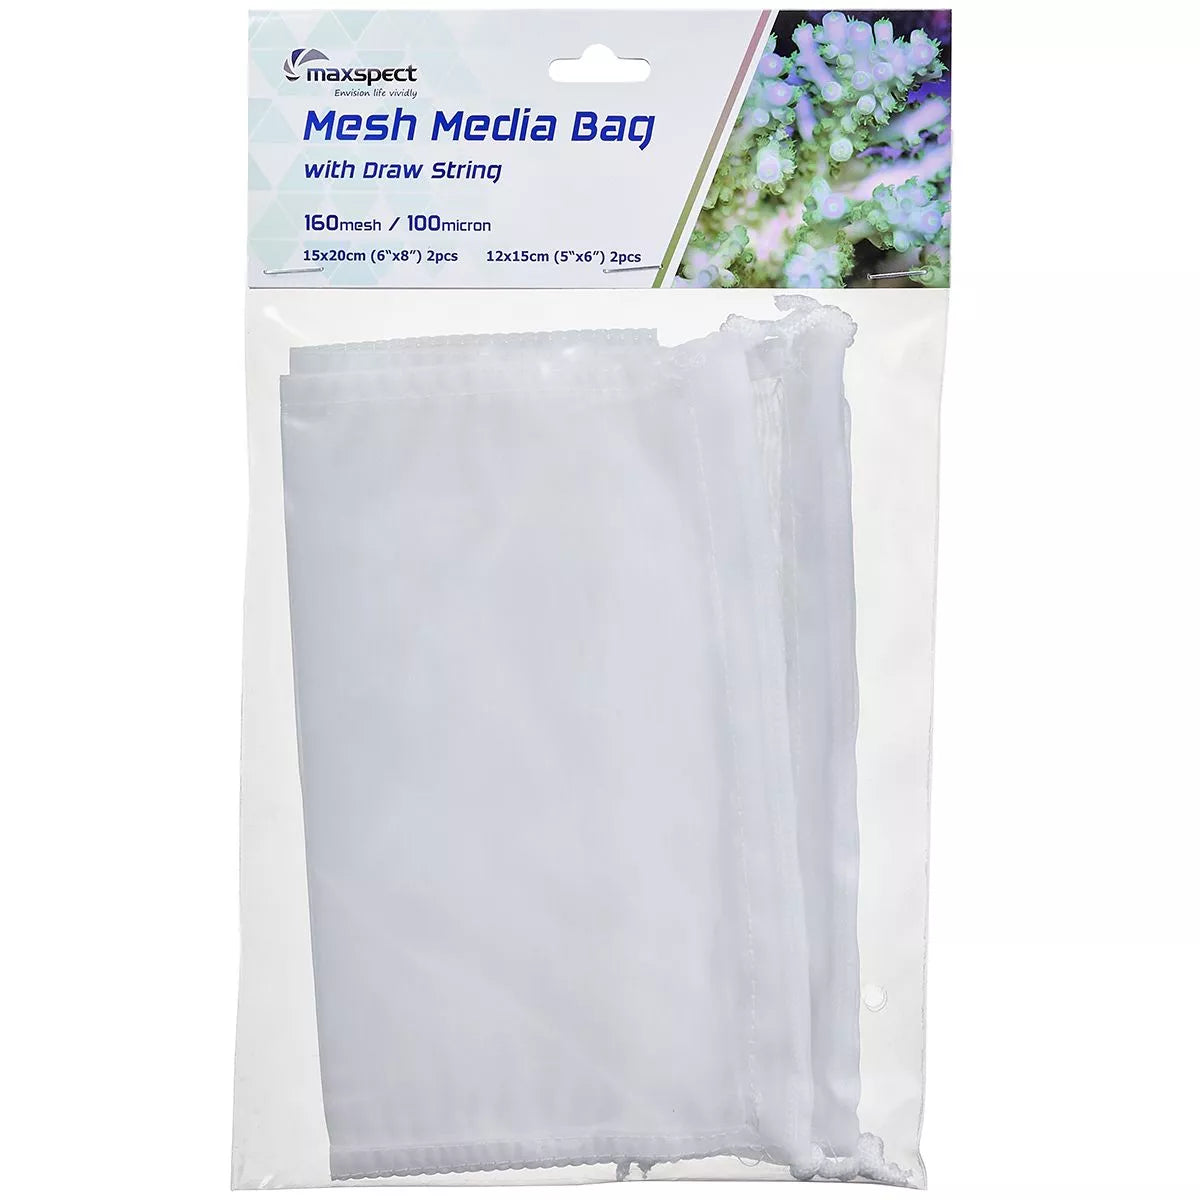 Maxspect Mesh Media Bag with Draw String (Set of 4)